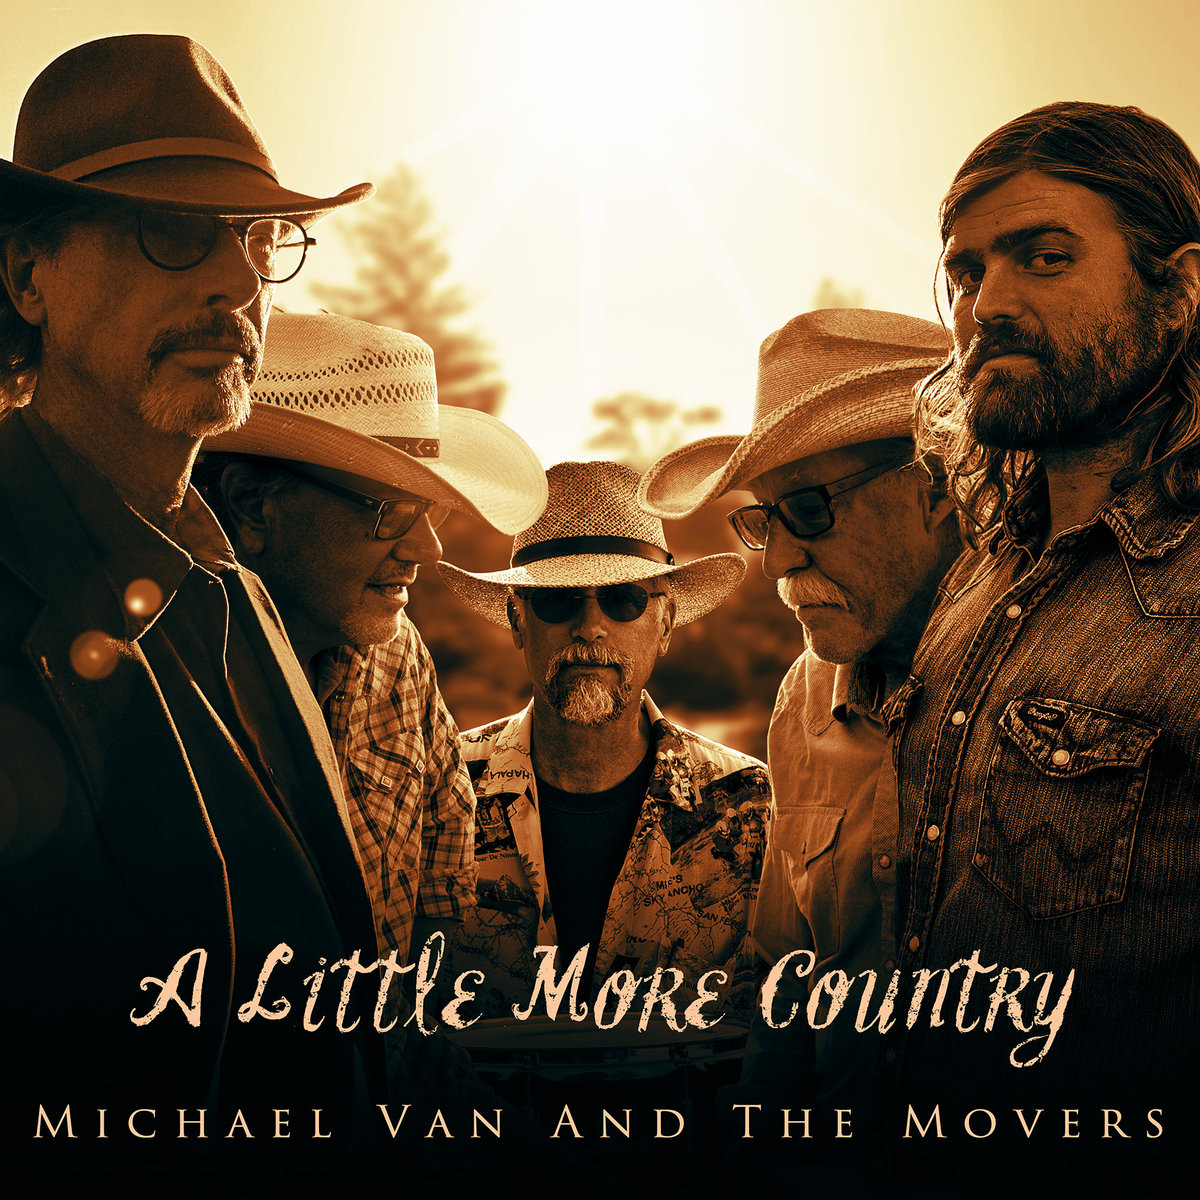 Michael Van and The Movers - A Little More Country